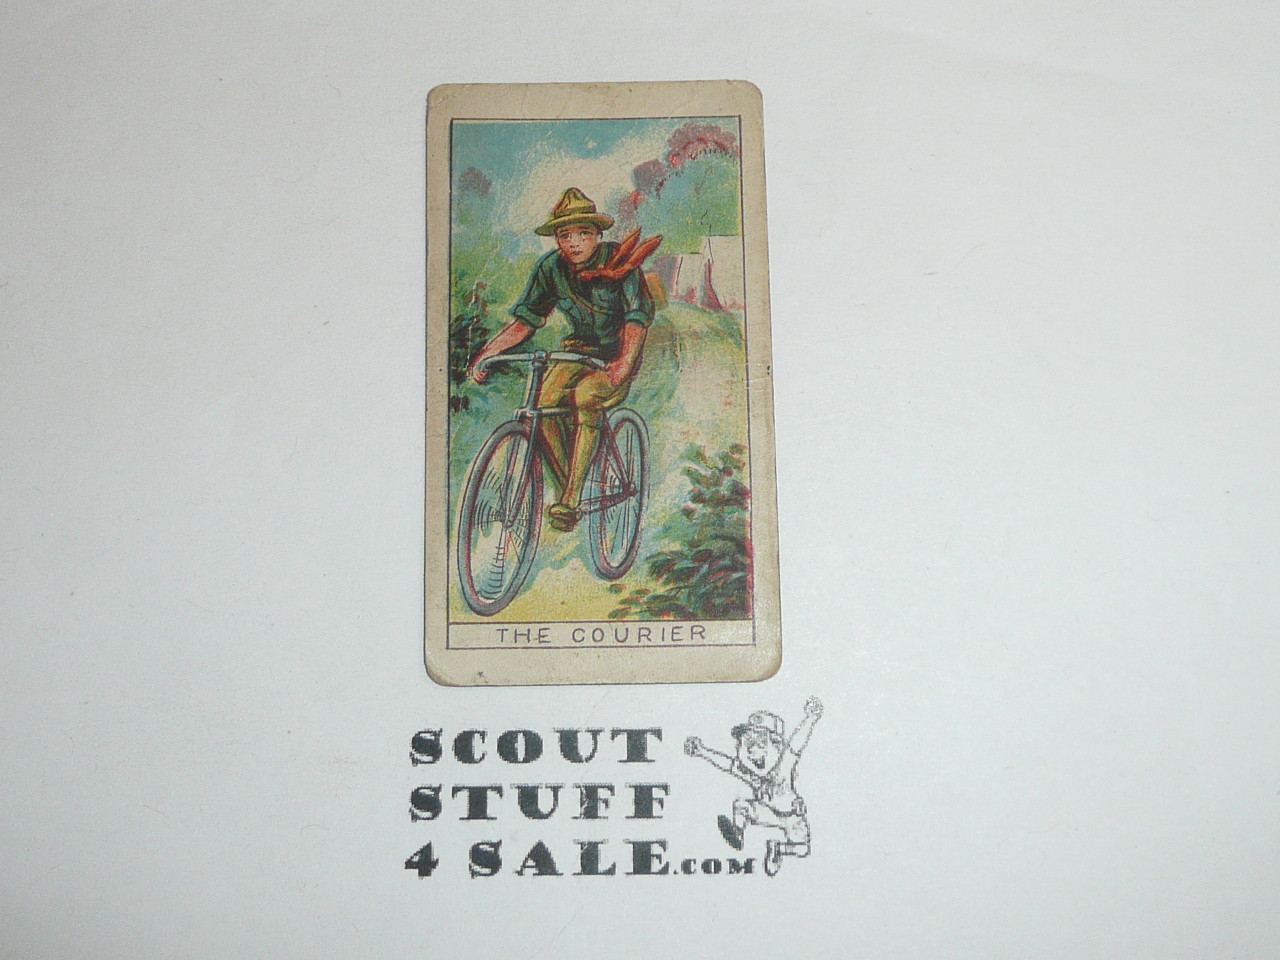 Fisher Candy Company, Philadelphia Pa, Boy Scout Card Series of 24, The Courier, 1910